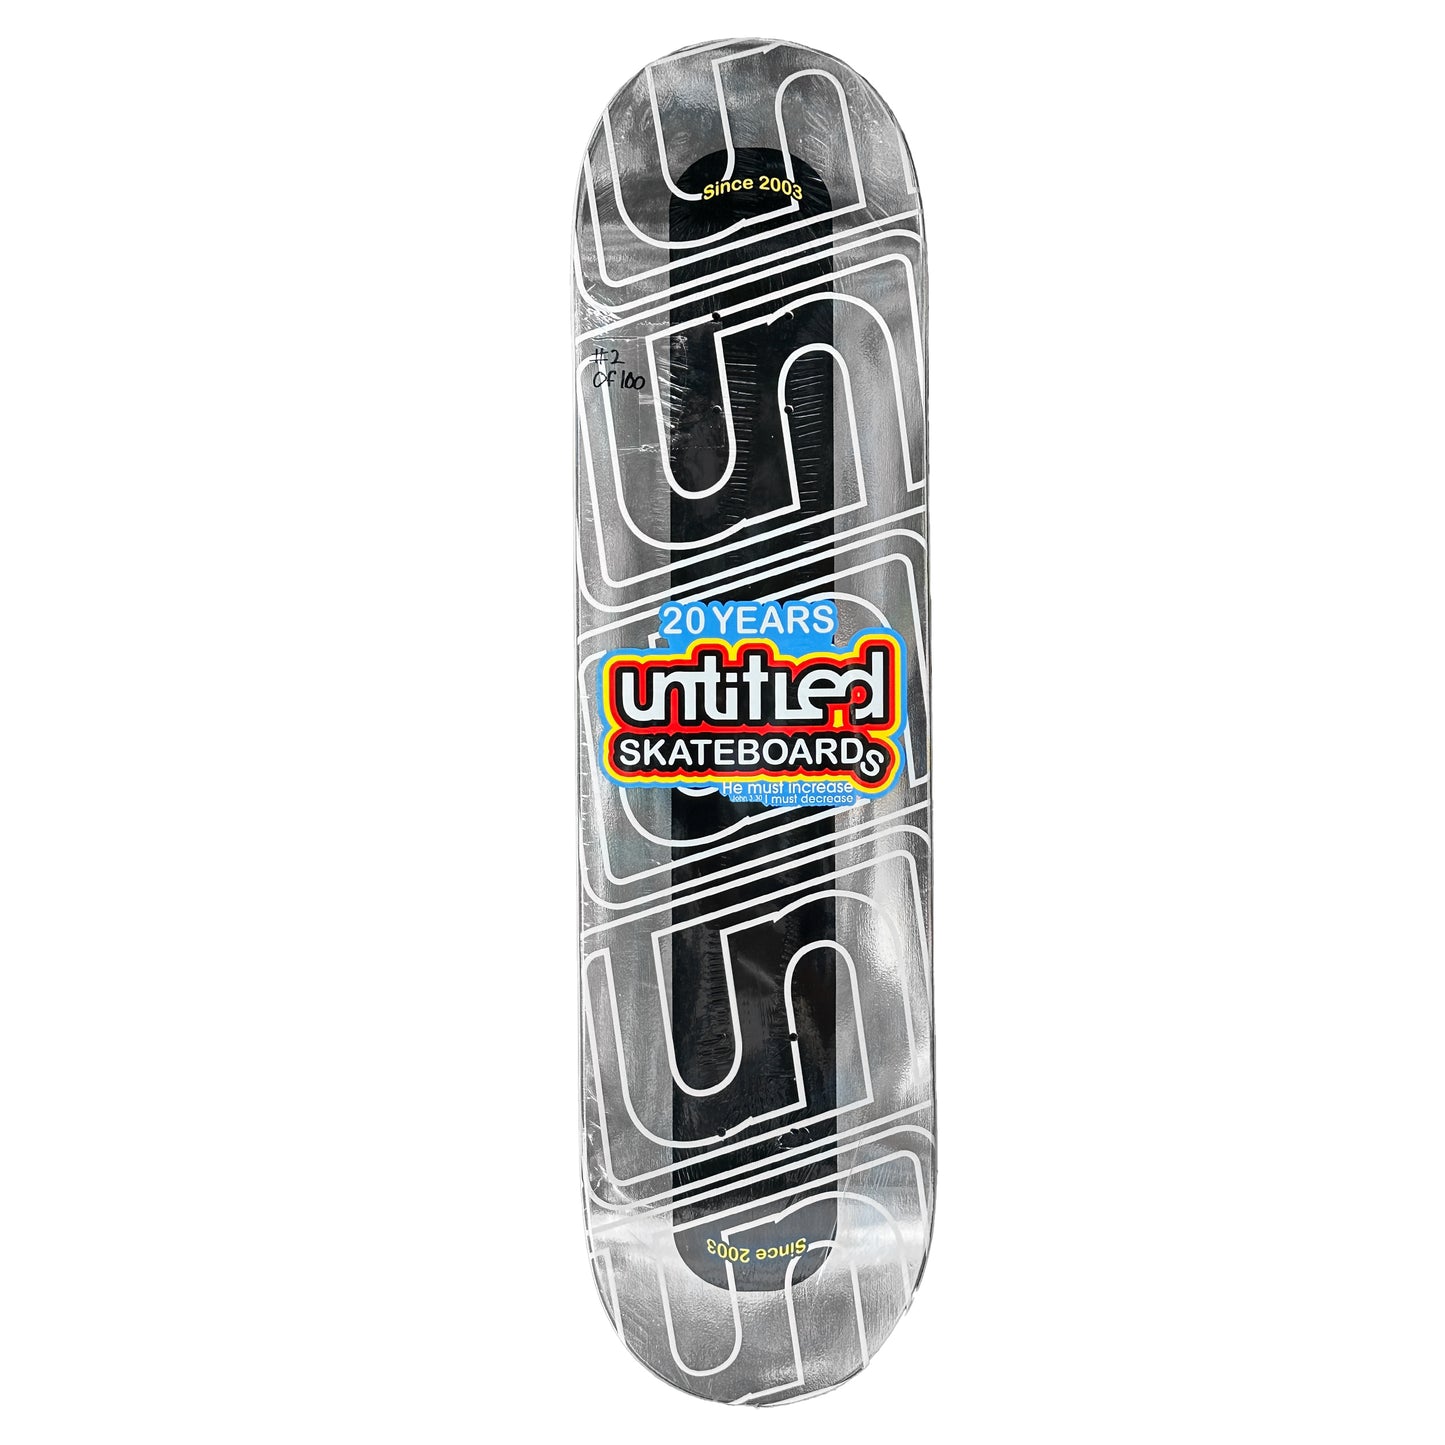 Untitled Skateboards 20 Year "Limited Edition" Silver Foil Board